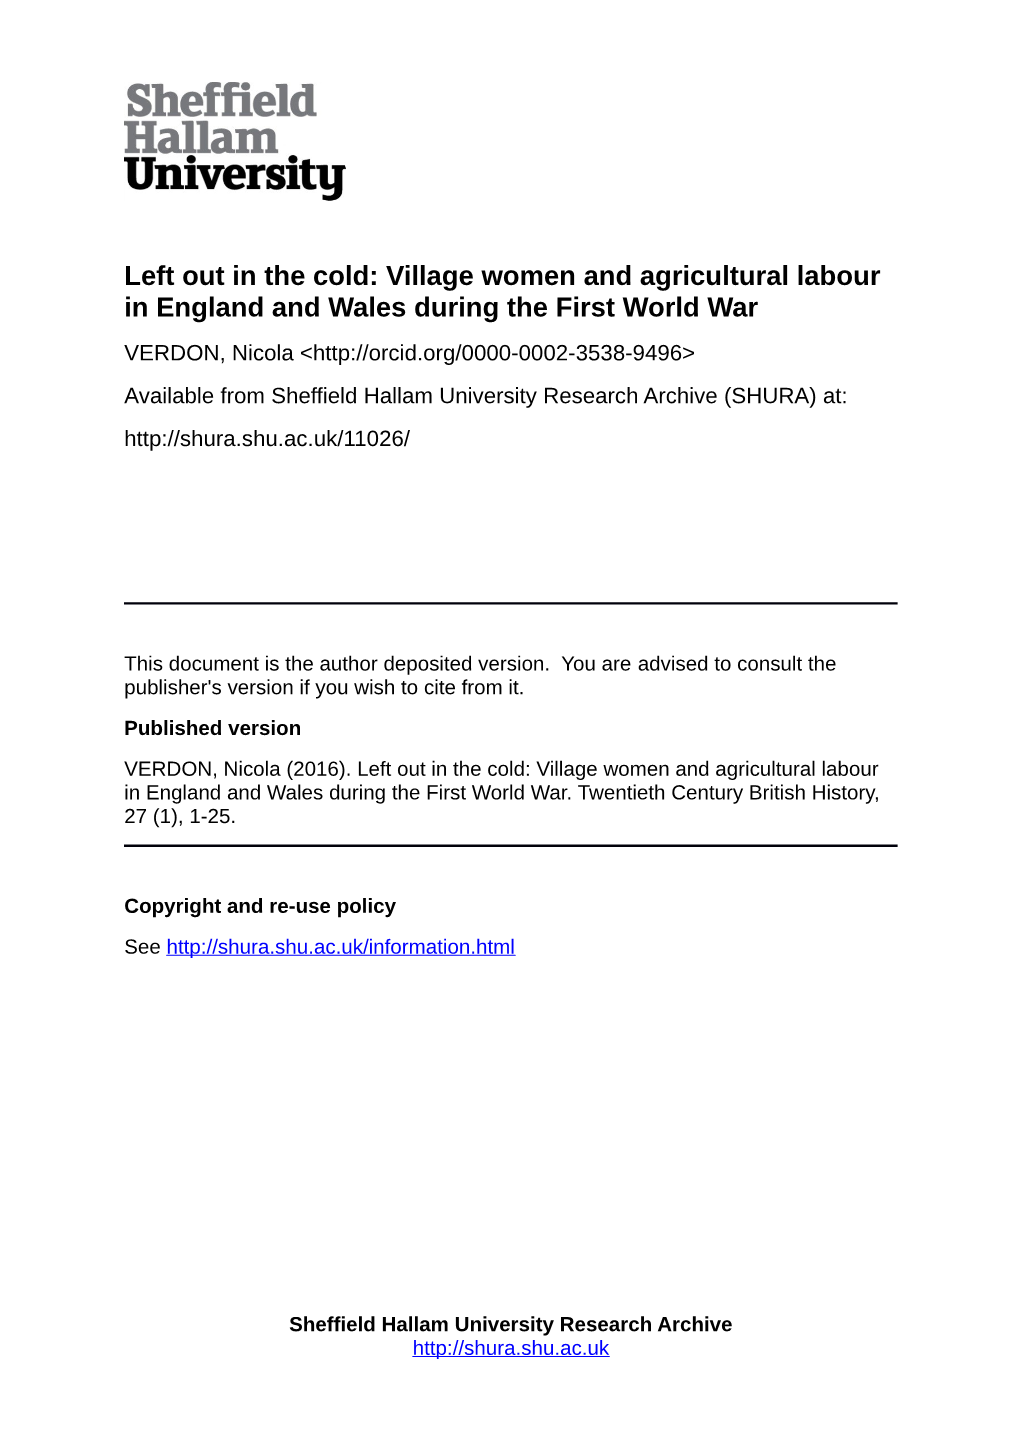 Left out in the Cold: Village Women and Agricultural Labour in England